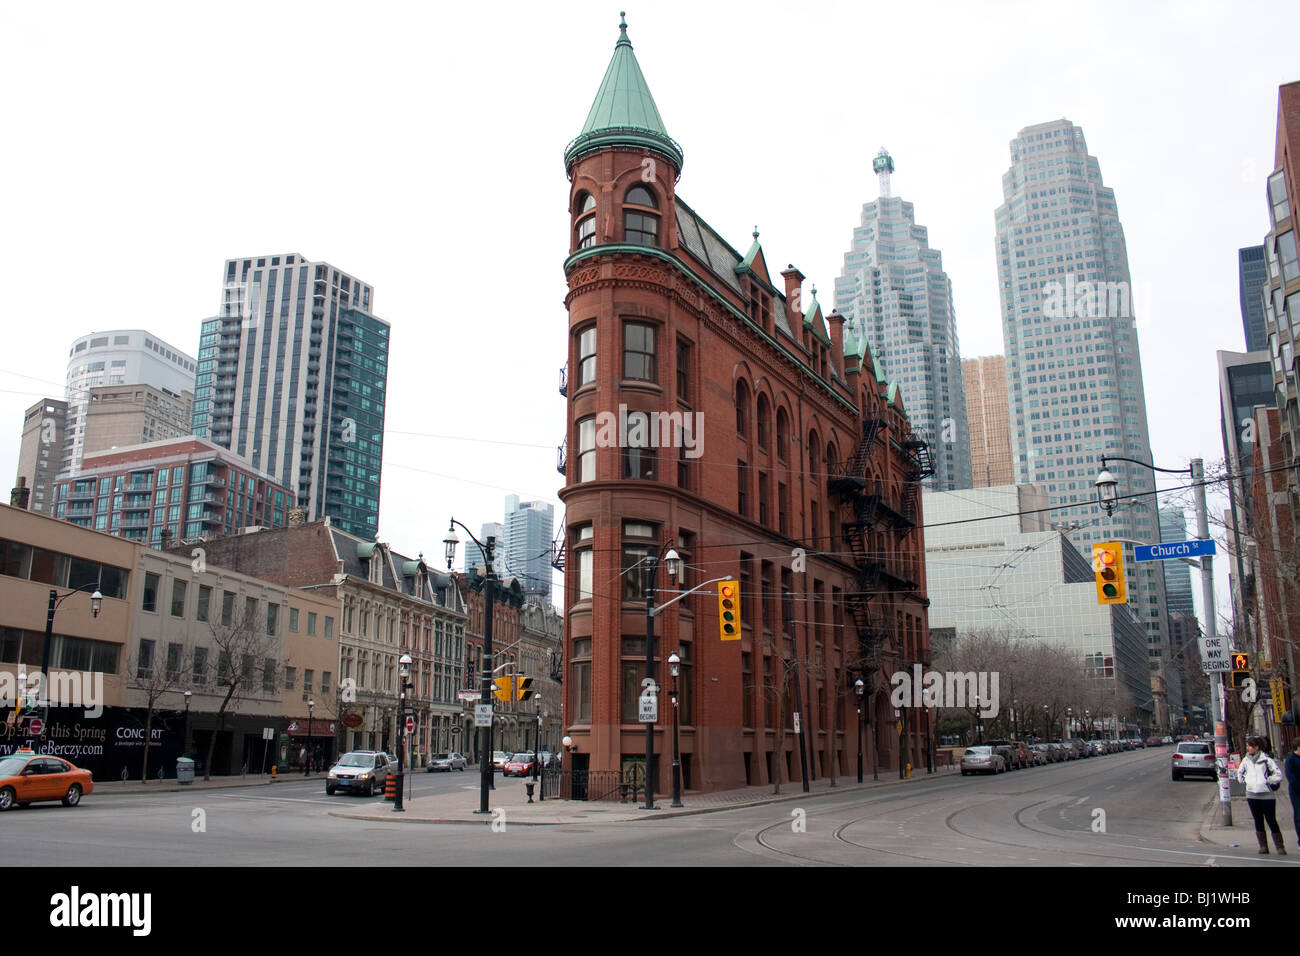 The Gooderham Building or the Flatrion Building Stock Photo